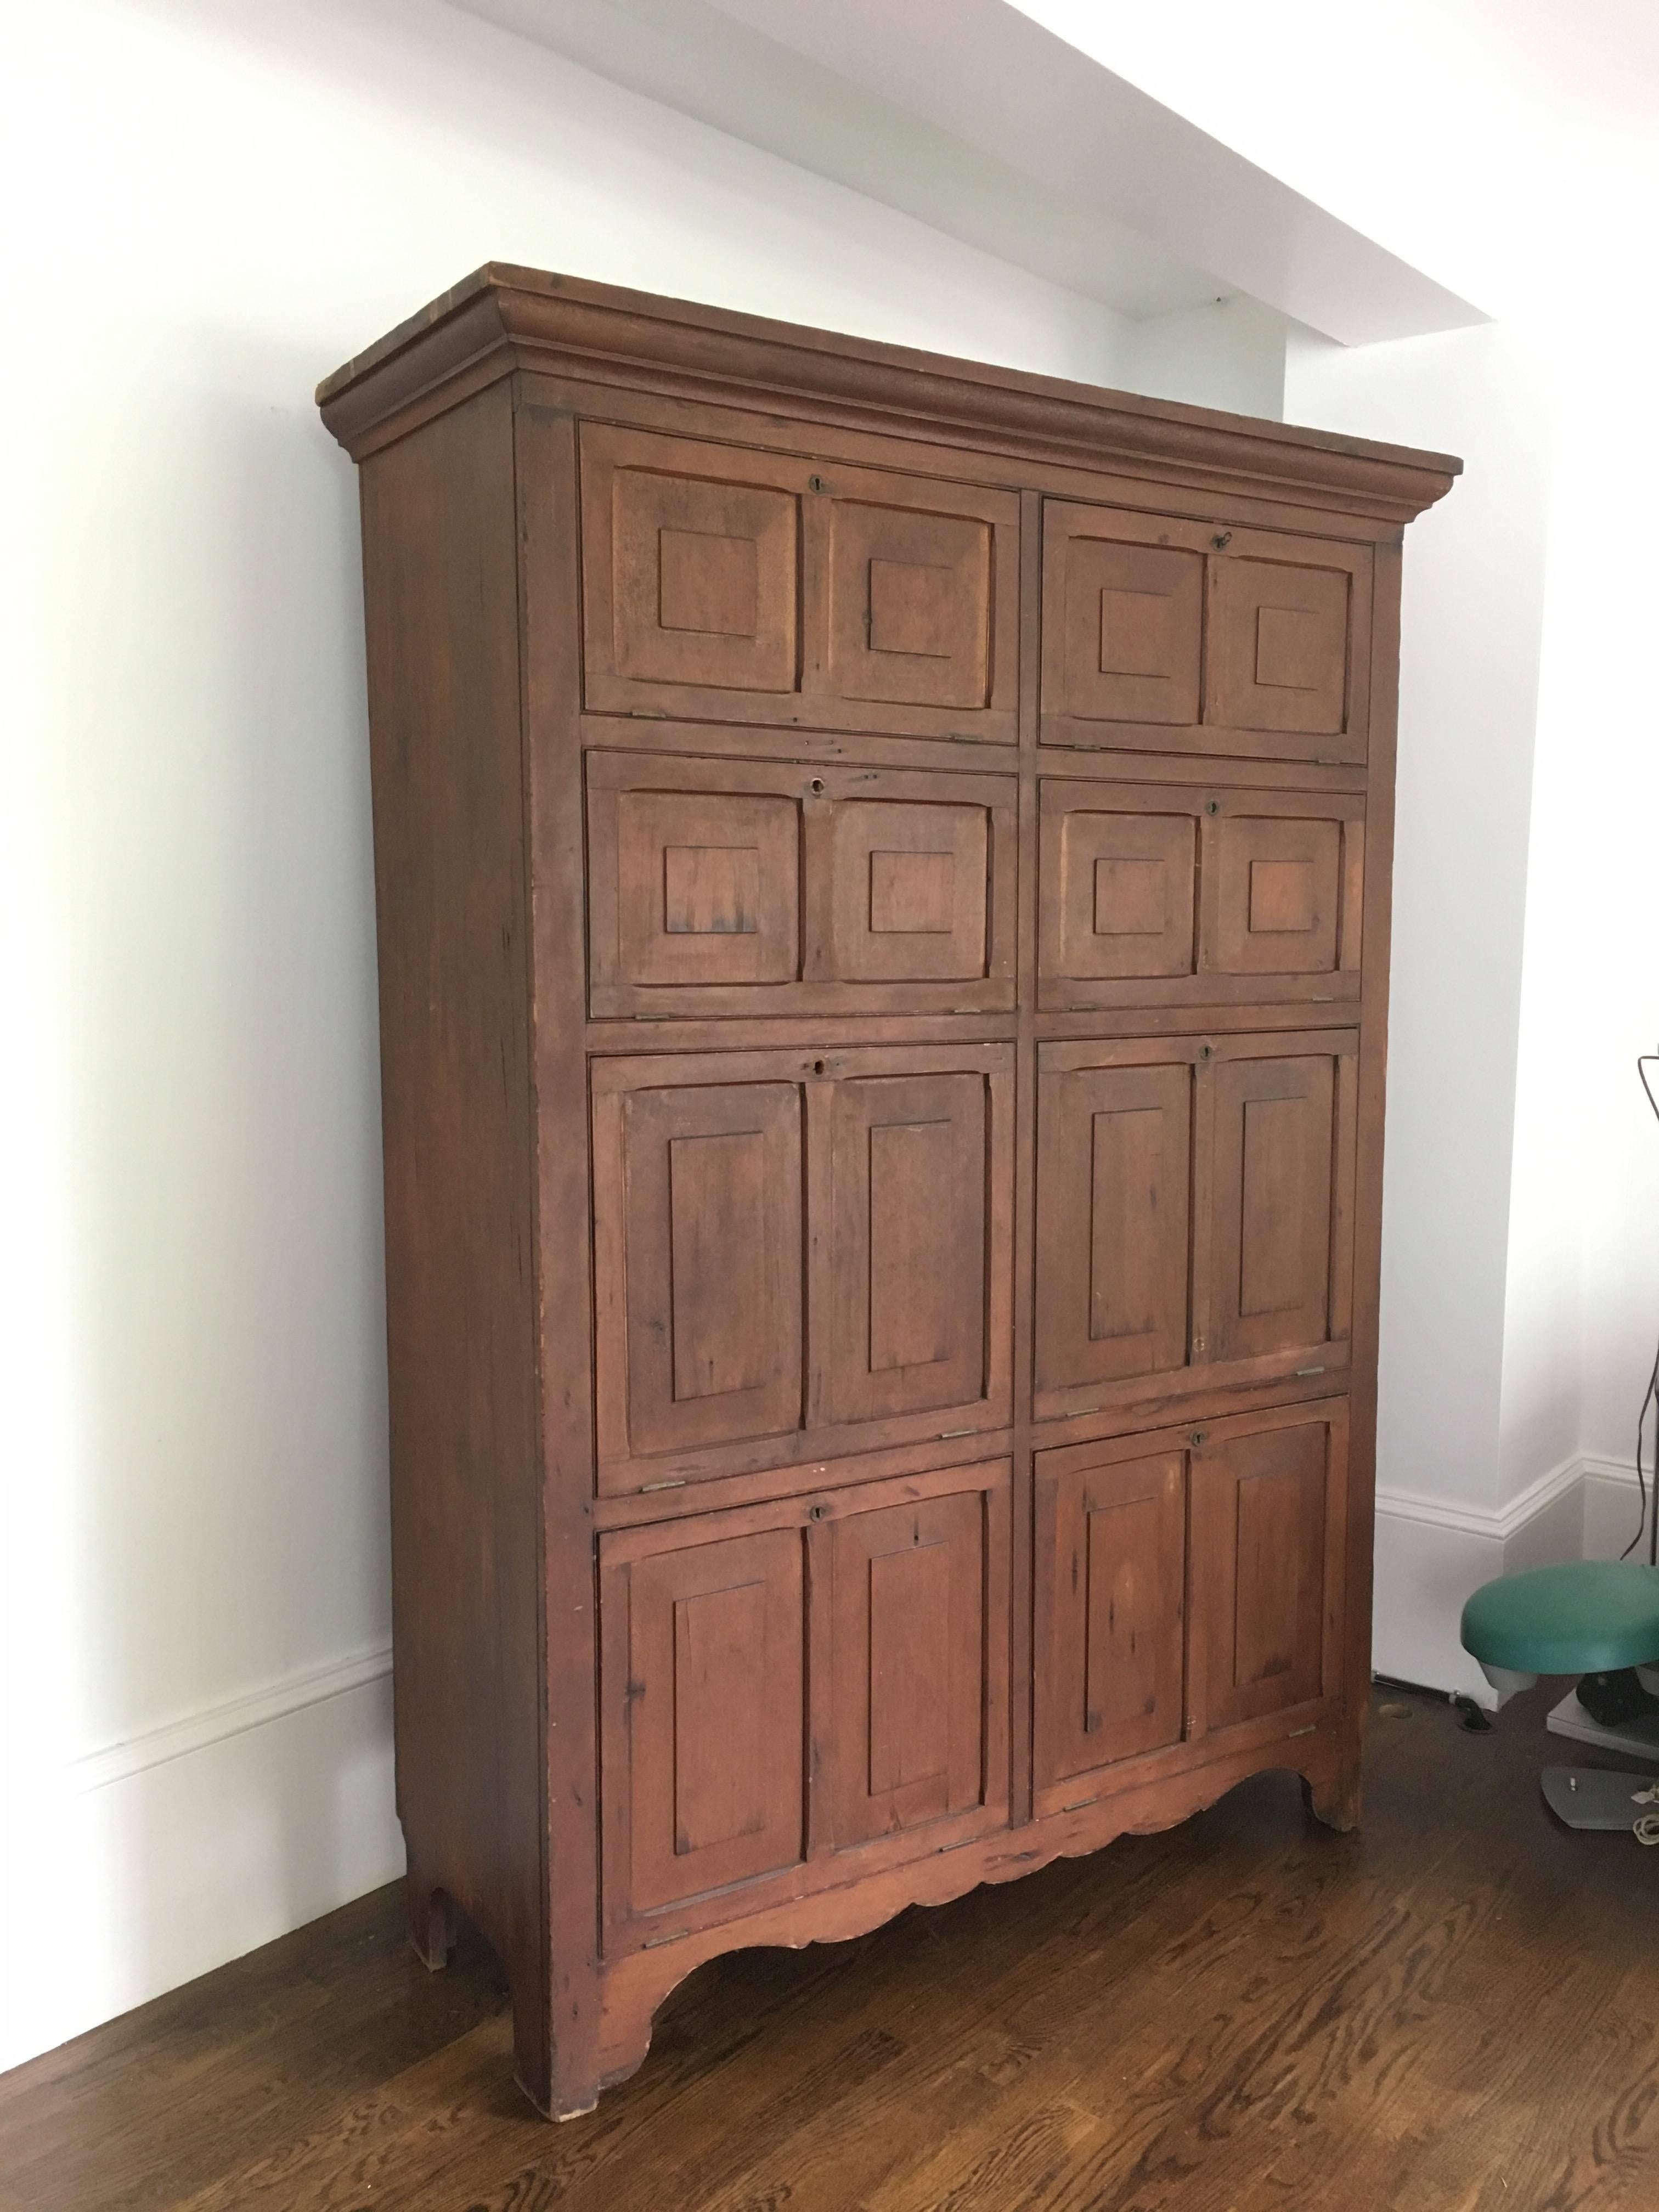 Rare and important early 19th century Shaker cabinet with drop down lockable doors; made of poplar, original finish, one single trefoil iron key. Upstate New York or New England.